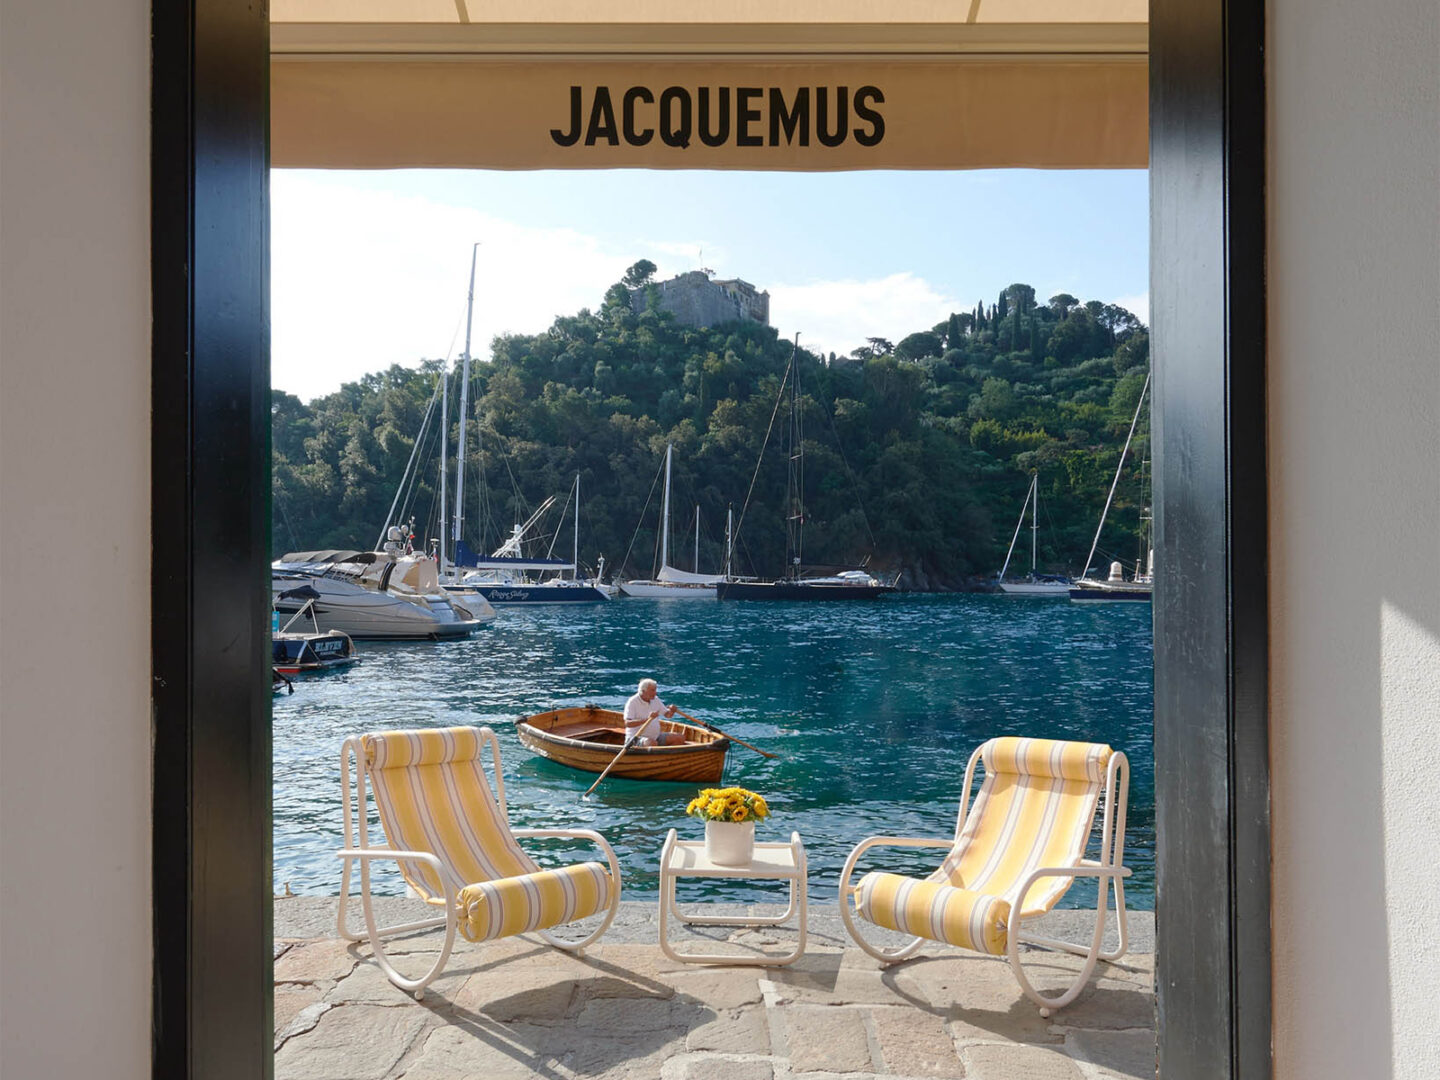 Jacquemus arrives in Portofino with its new pop-up store